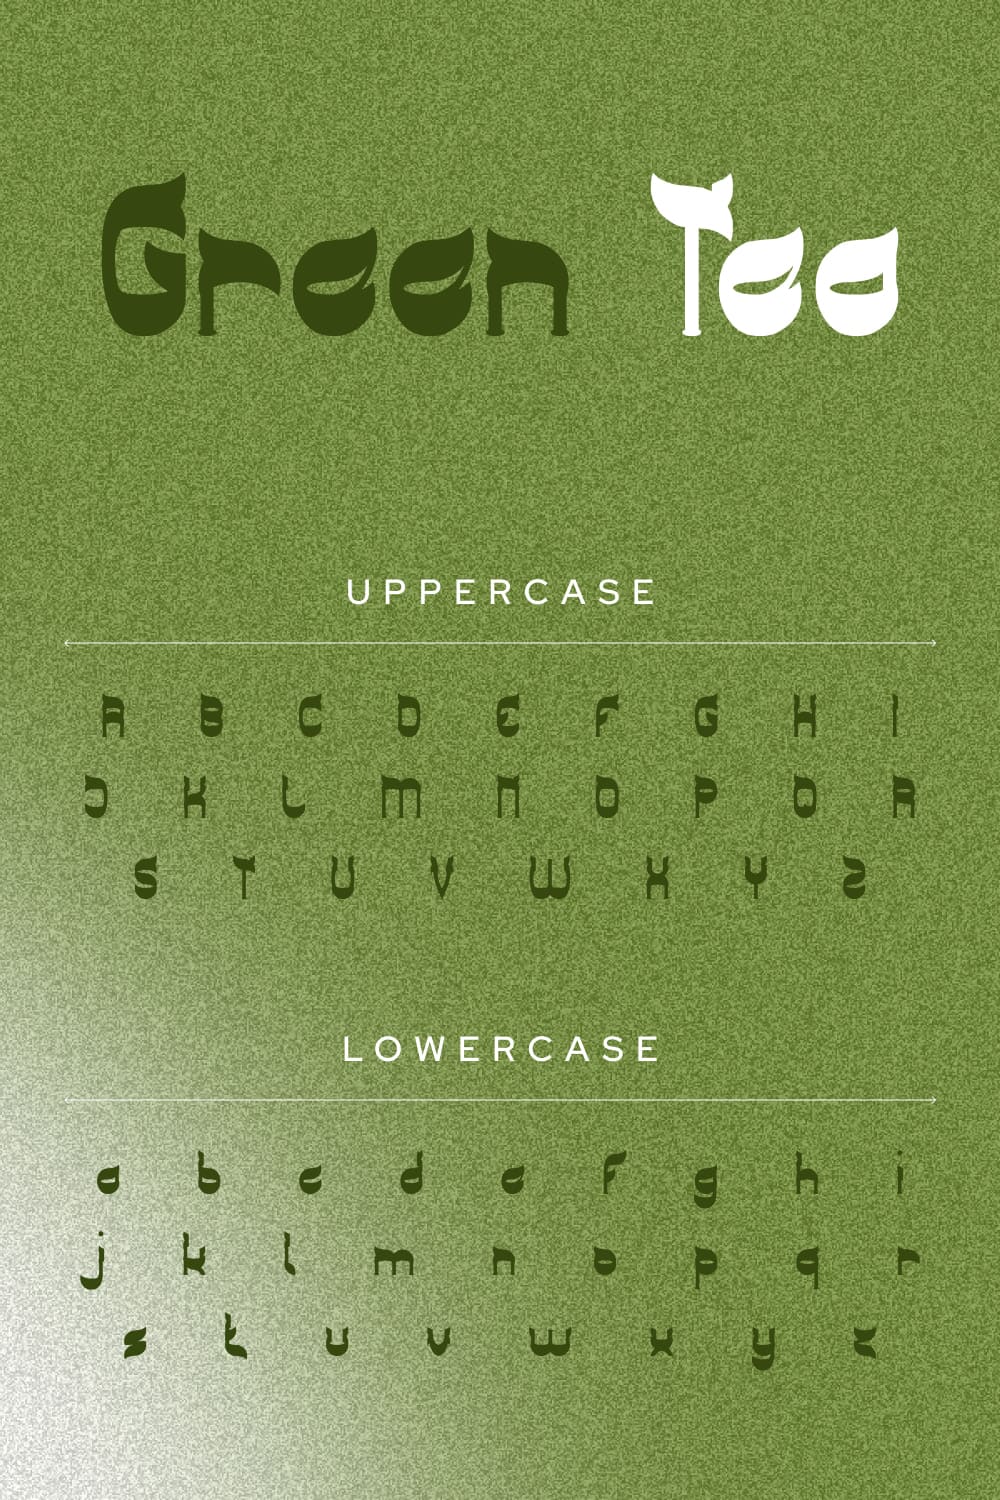 Free Green Tea Patrick Font Pinterest uppercase and lowercase preview.